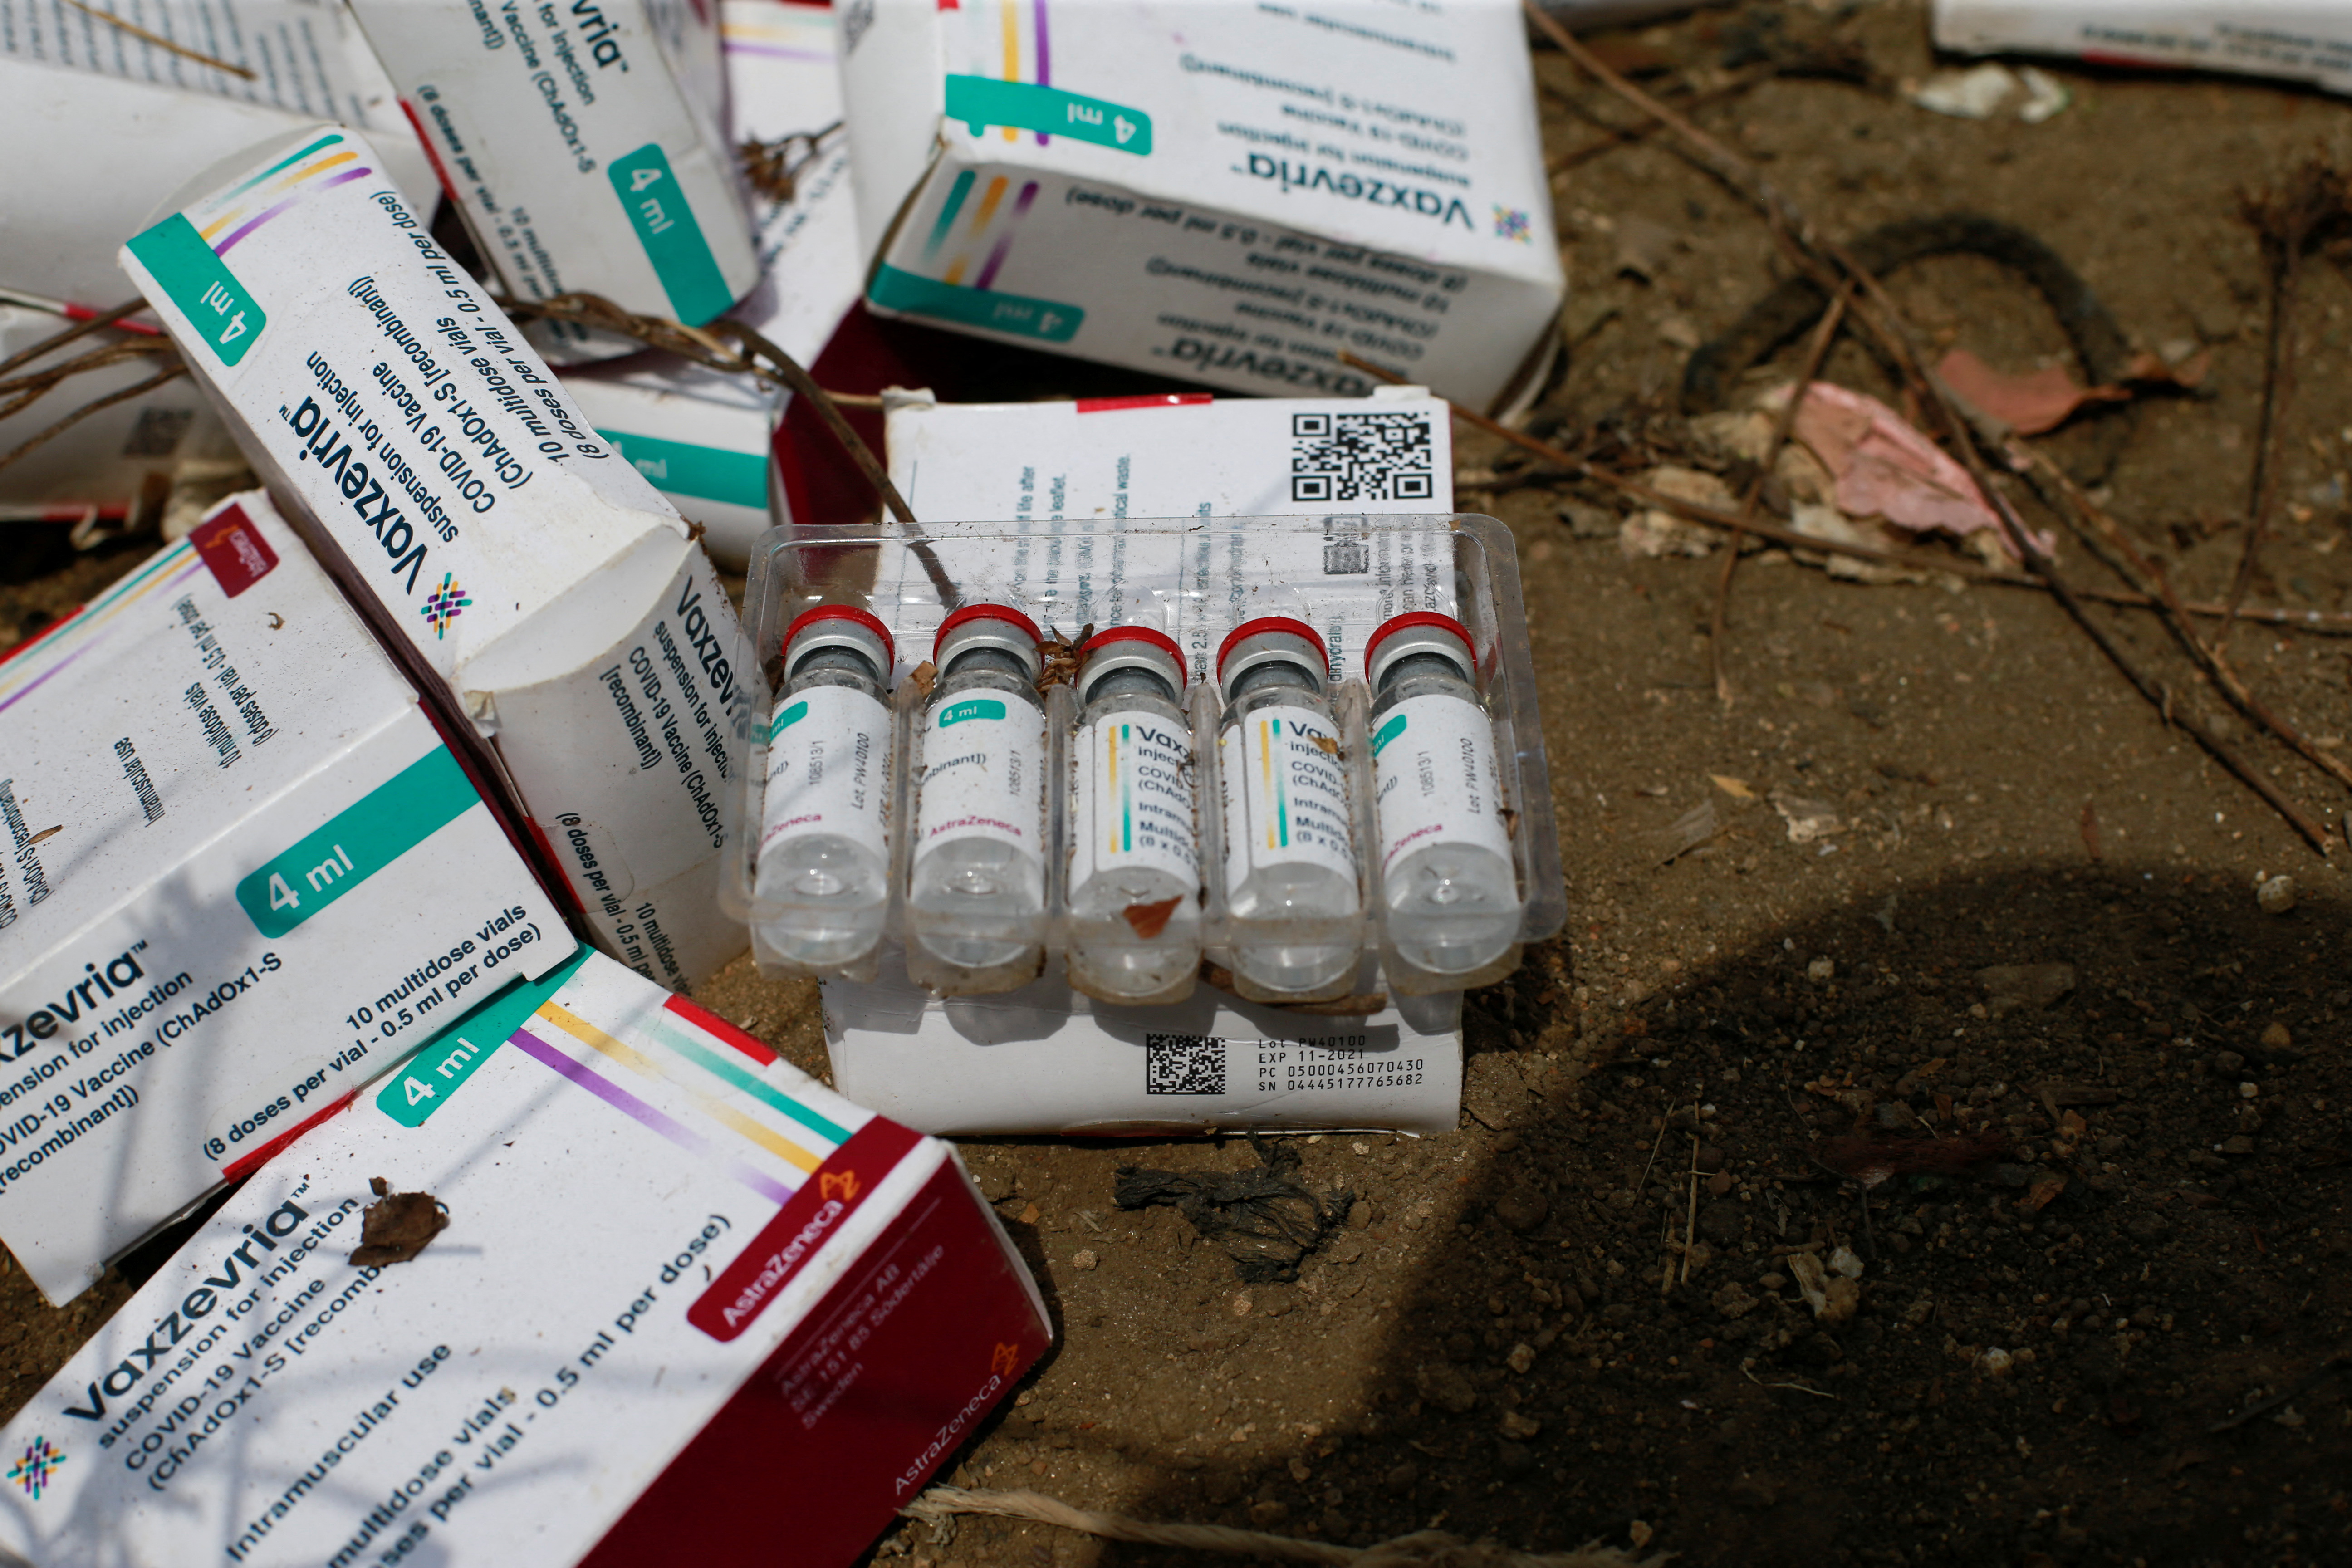 Some samples of the expired AstraZeneca Covid-19 vaccines are seen at the Gosa dump site in Abuja